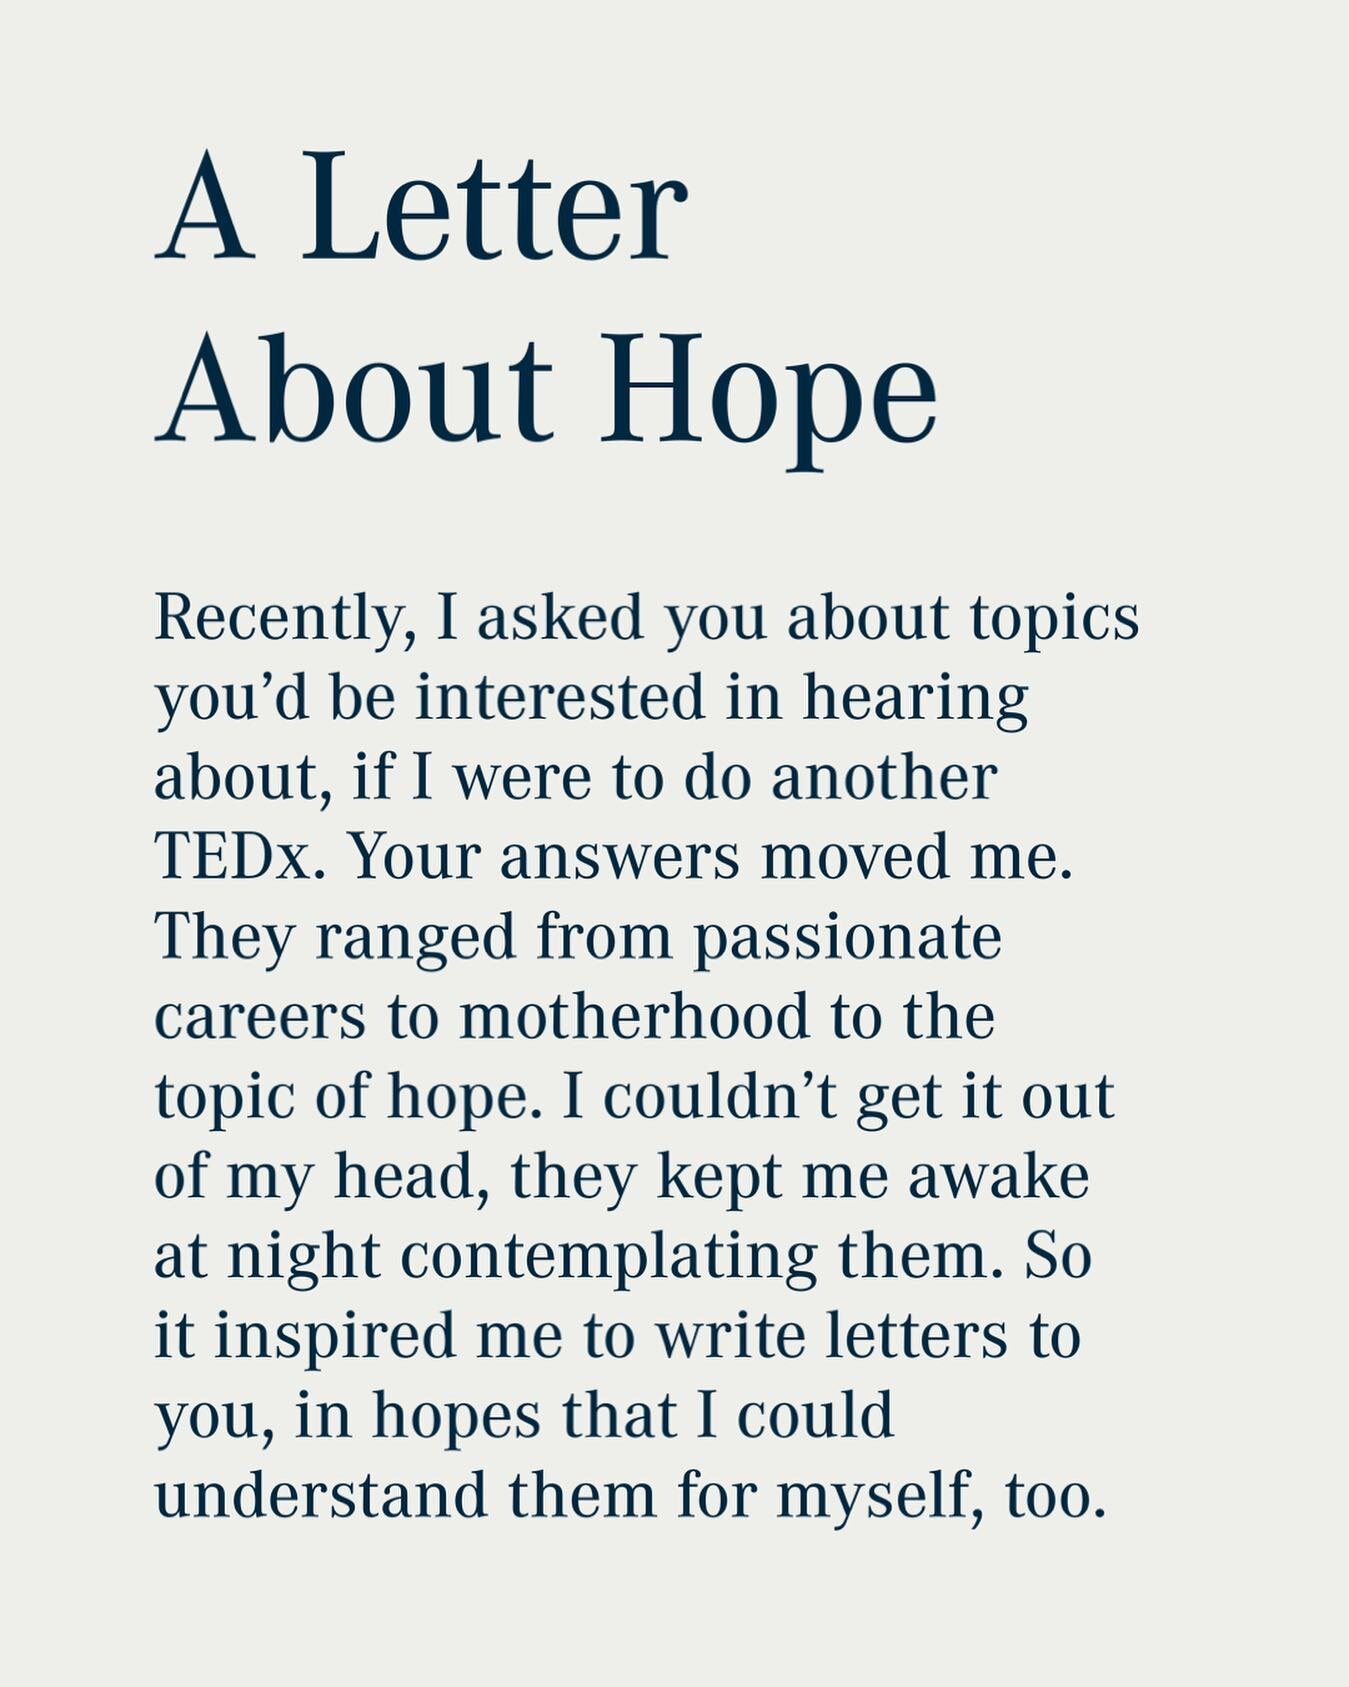 I wrote you a letter about hope, for those of you who asked. It&rsquo;s just one facet of the enormous topic, but it&rsquo;s a start. 

It&rsquo;s on my website, under JOURNAL. Link in bio.

And I thank you for suggesting it, I learned a lot from wri